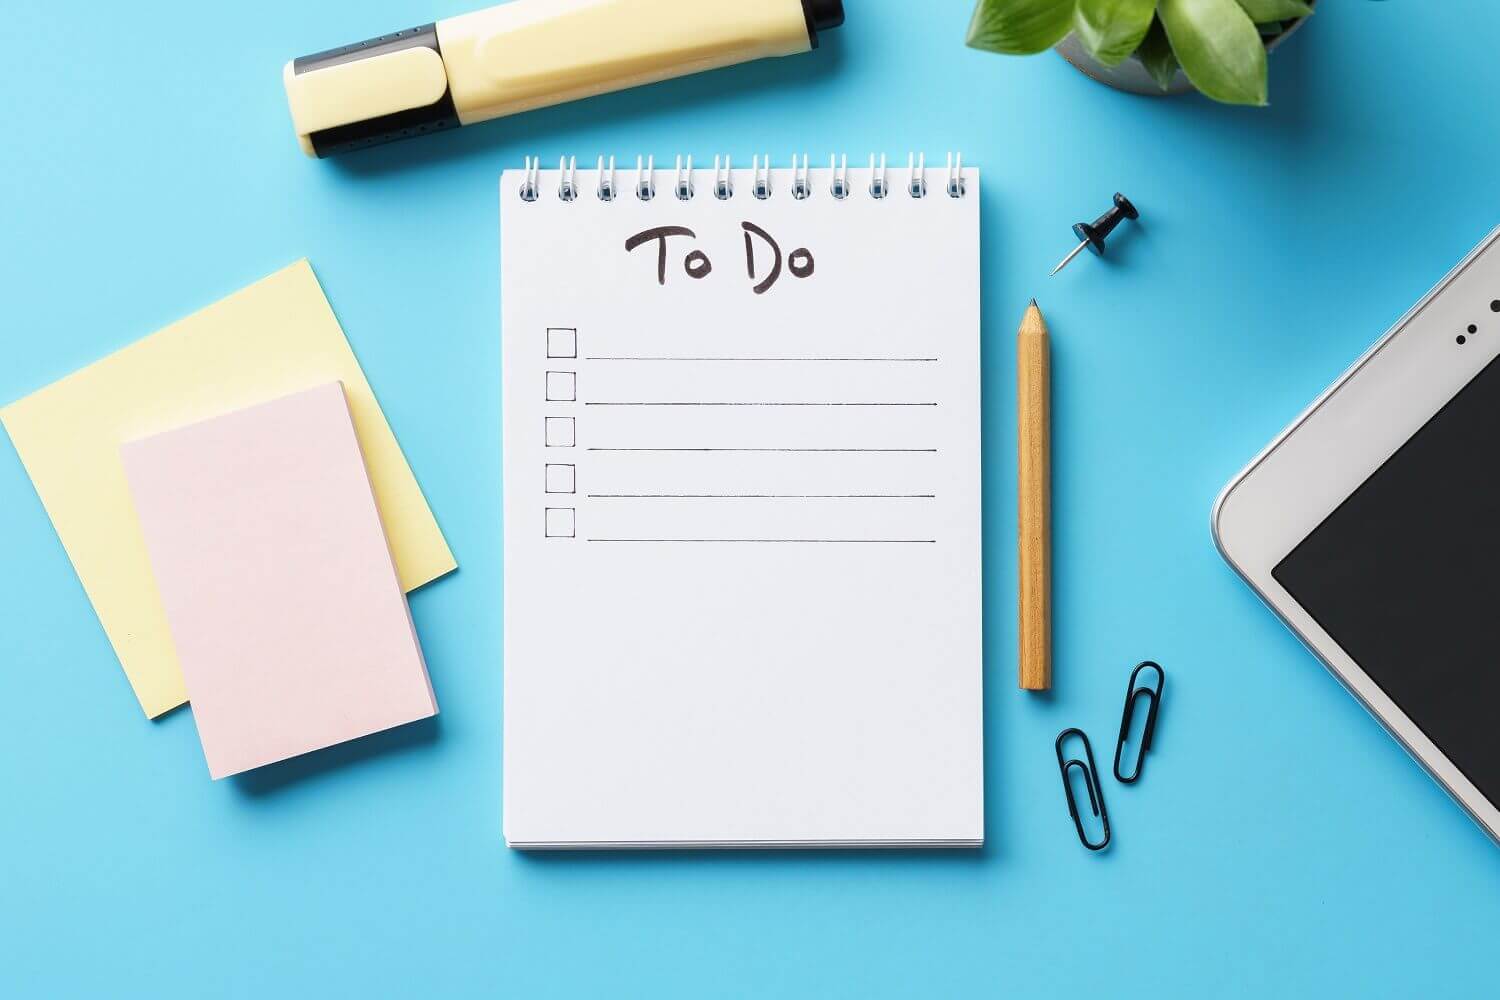 paper to-do lists - pros and cons